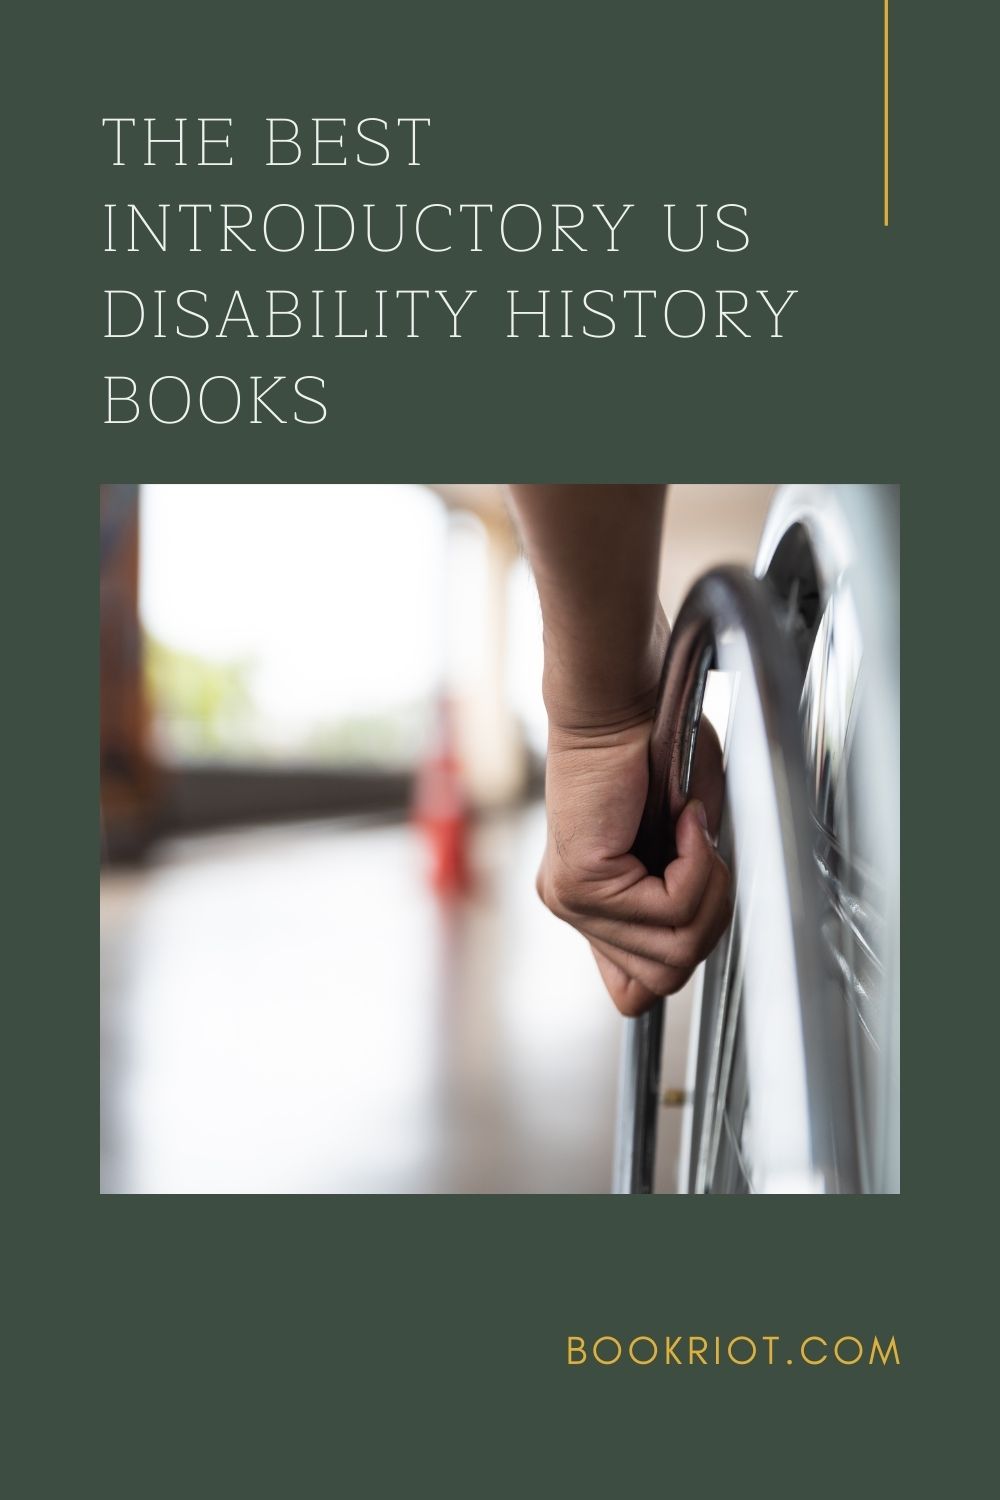 a disability history of the united states by kim e nielsen